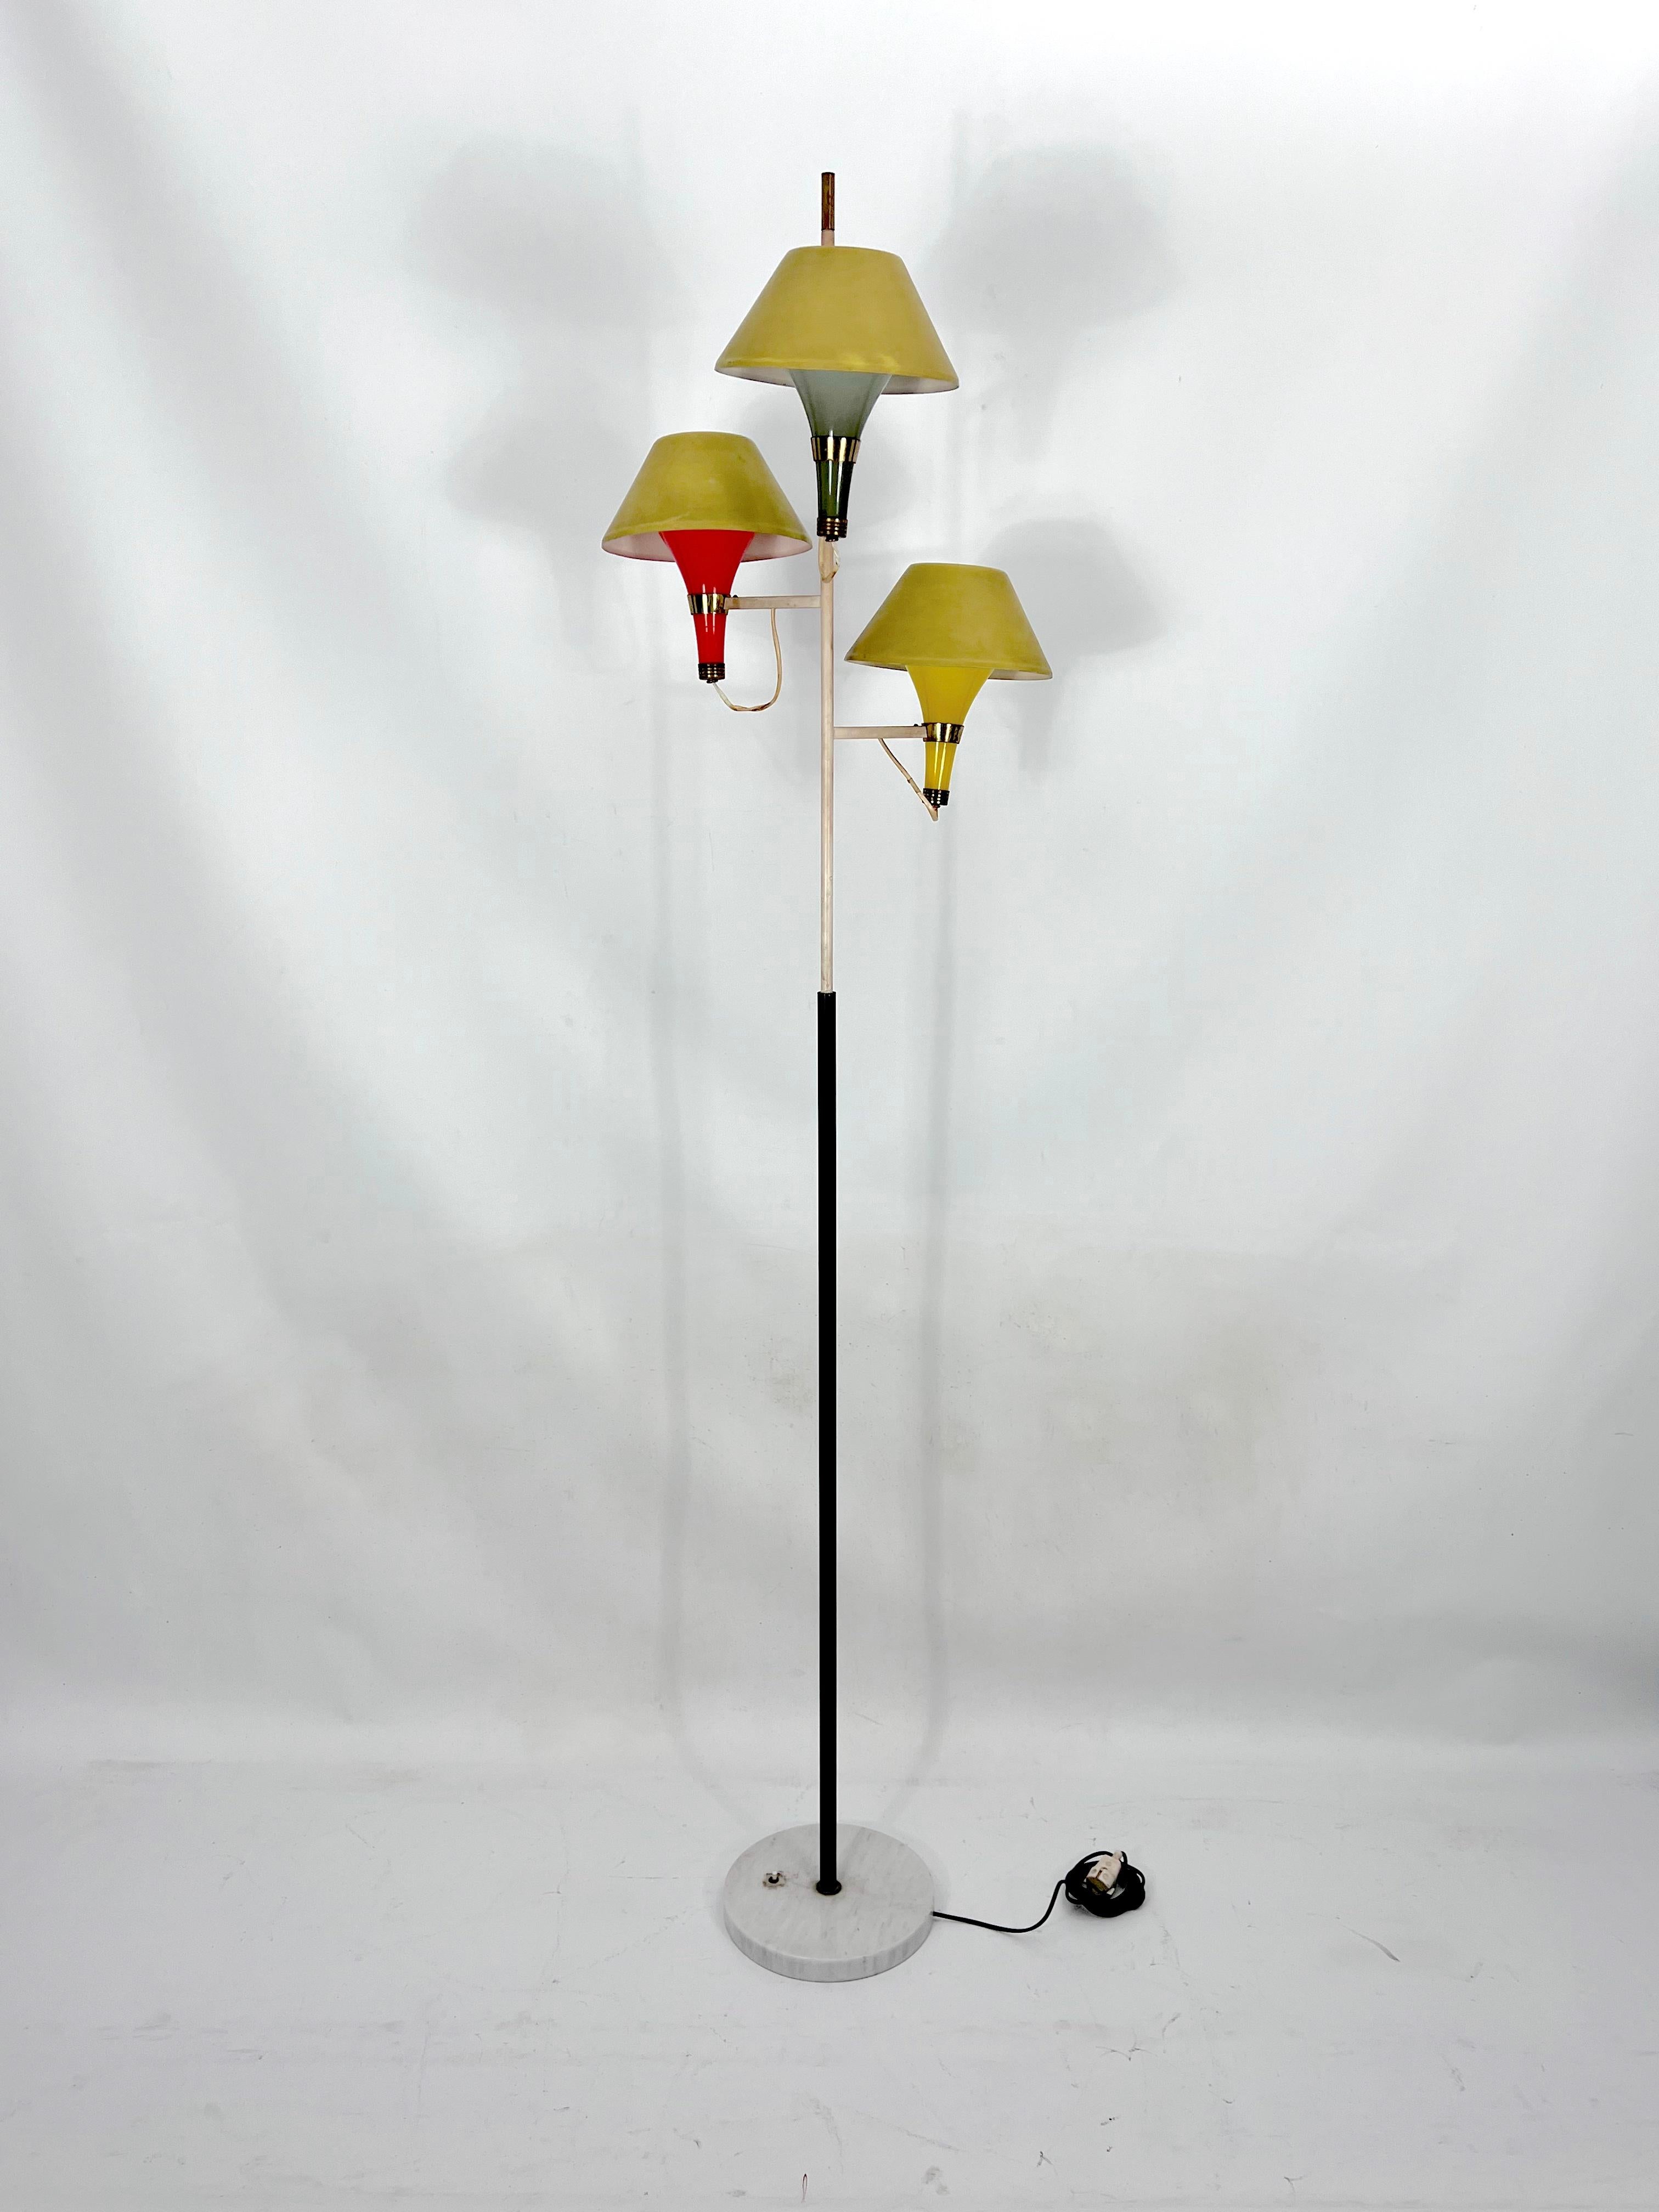 Rare three arms floor lamp produced by Stilux Milano during the 50s. Marble base with lacquered metal stem and brass details. Three arms with colored murano glass light diffusers and lacquered aluminum hats on top. Fair original vintage condition